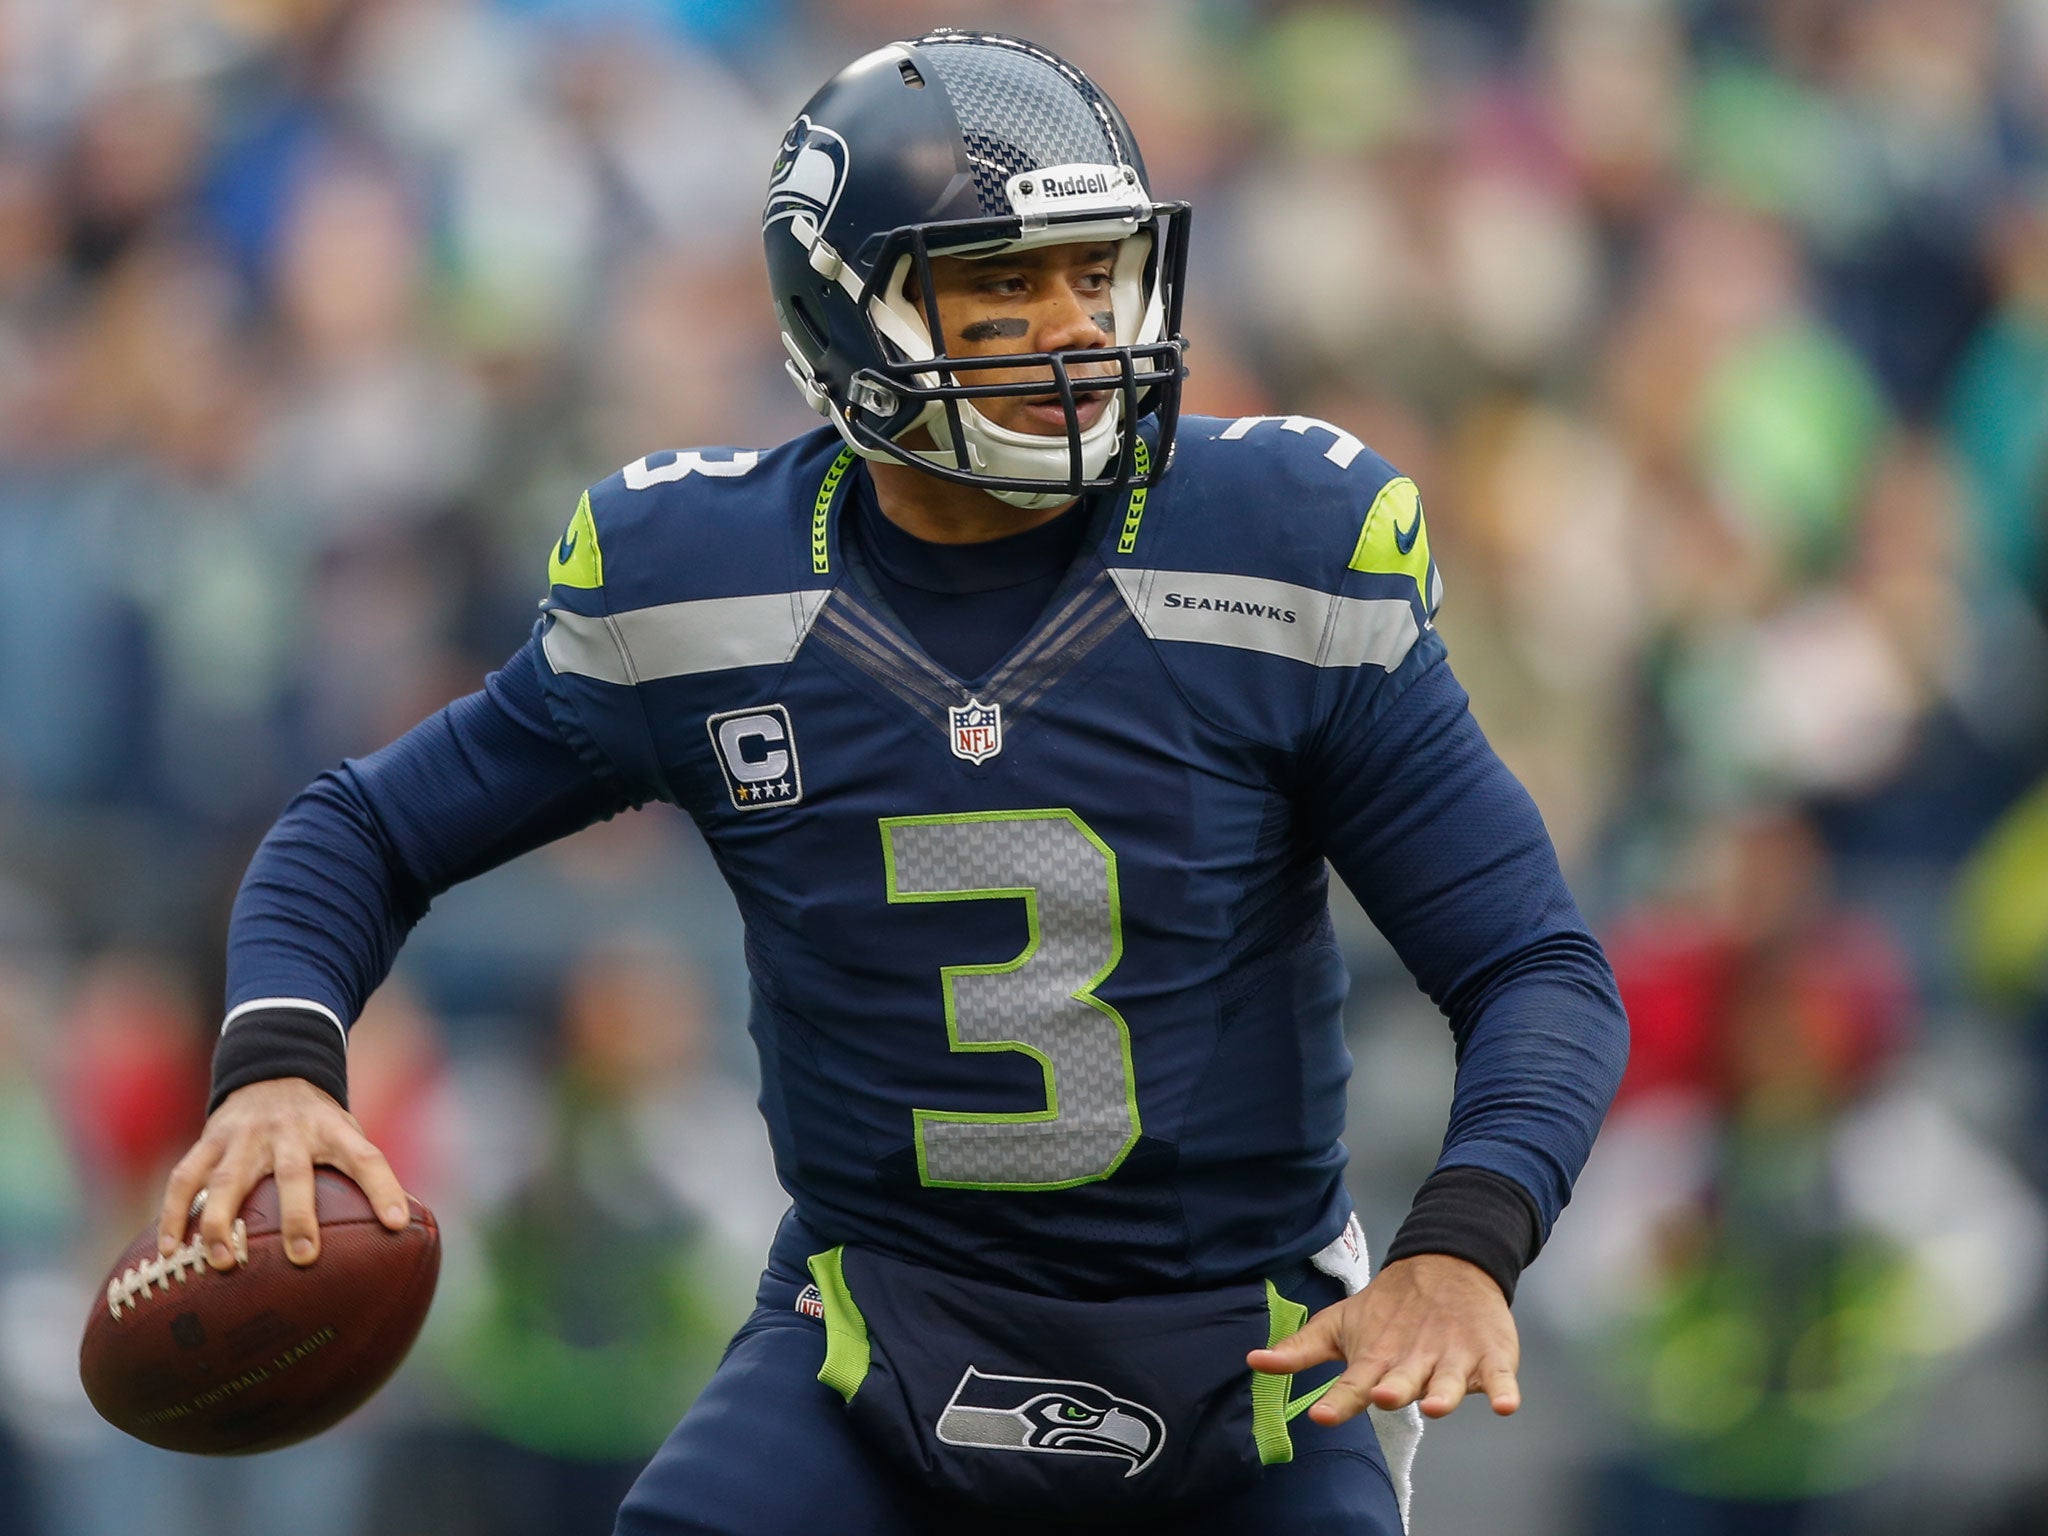 Russell Wilson will be hoping to guide the Seattle Seahawks to victory over the New Orleans Saints